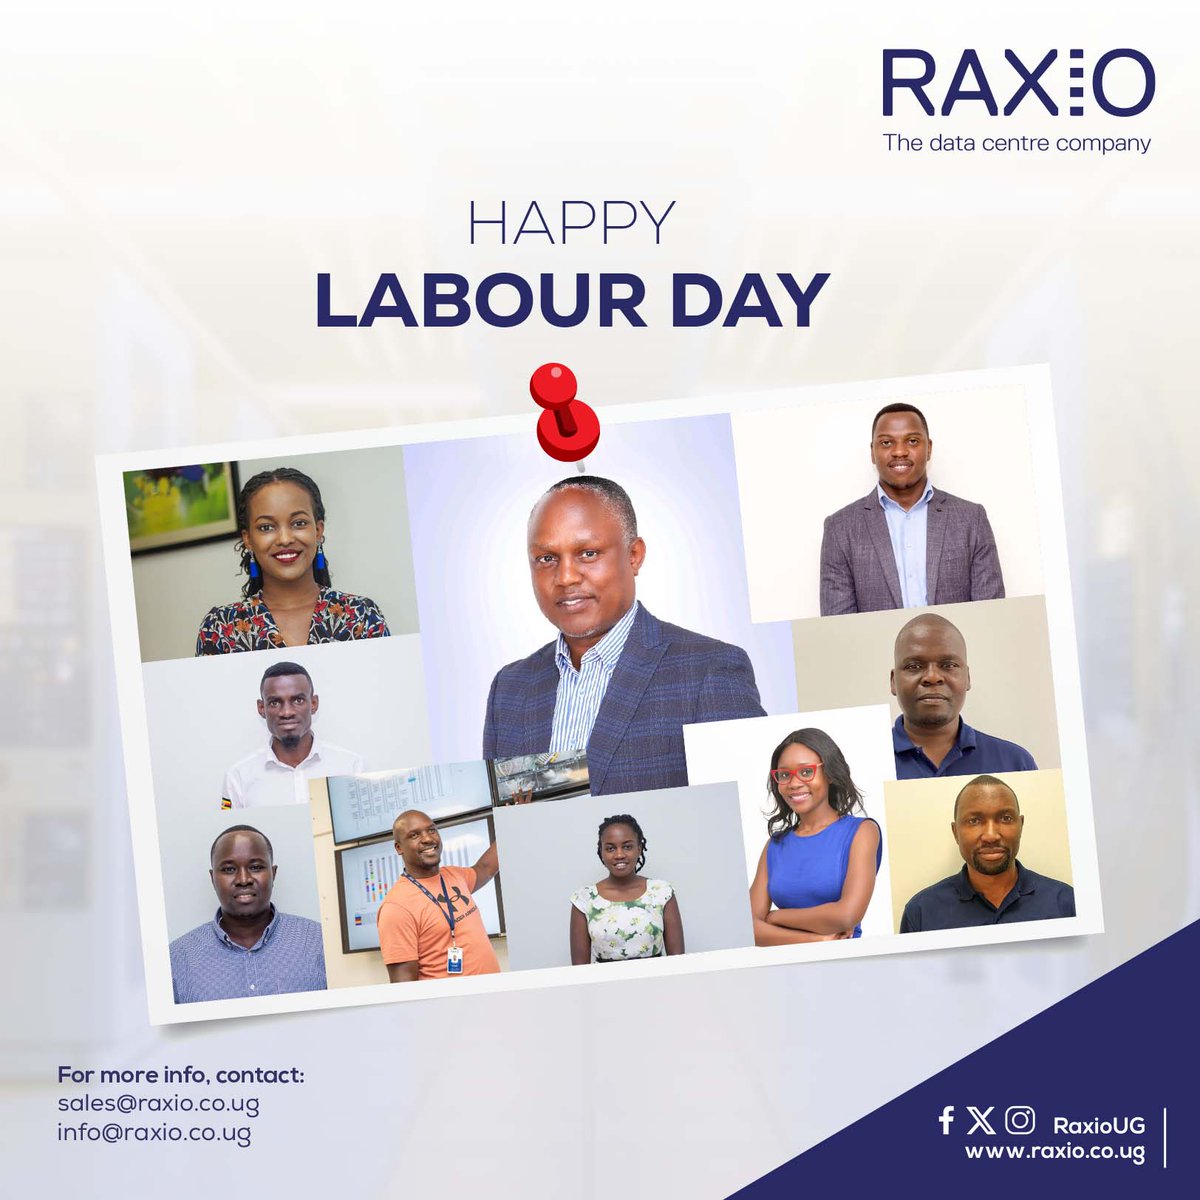 To our Raxio team, thank you for your tireless efforts in driving progress towards digital transformation. Your commitment fuels our mission to revolutionize data centre services. #RaxioDataCentres